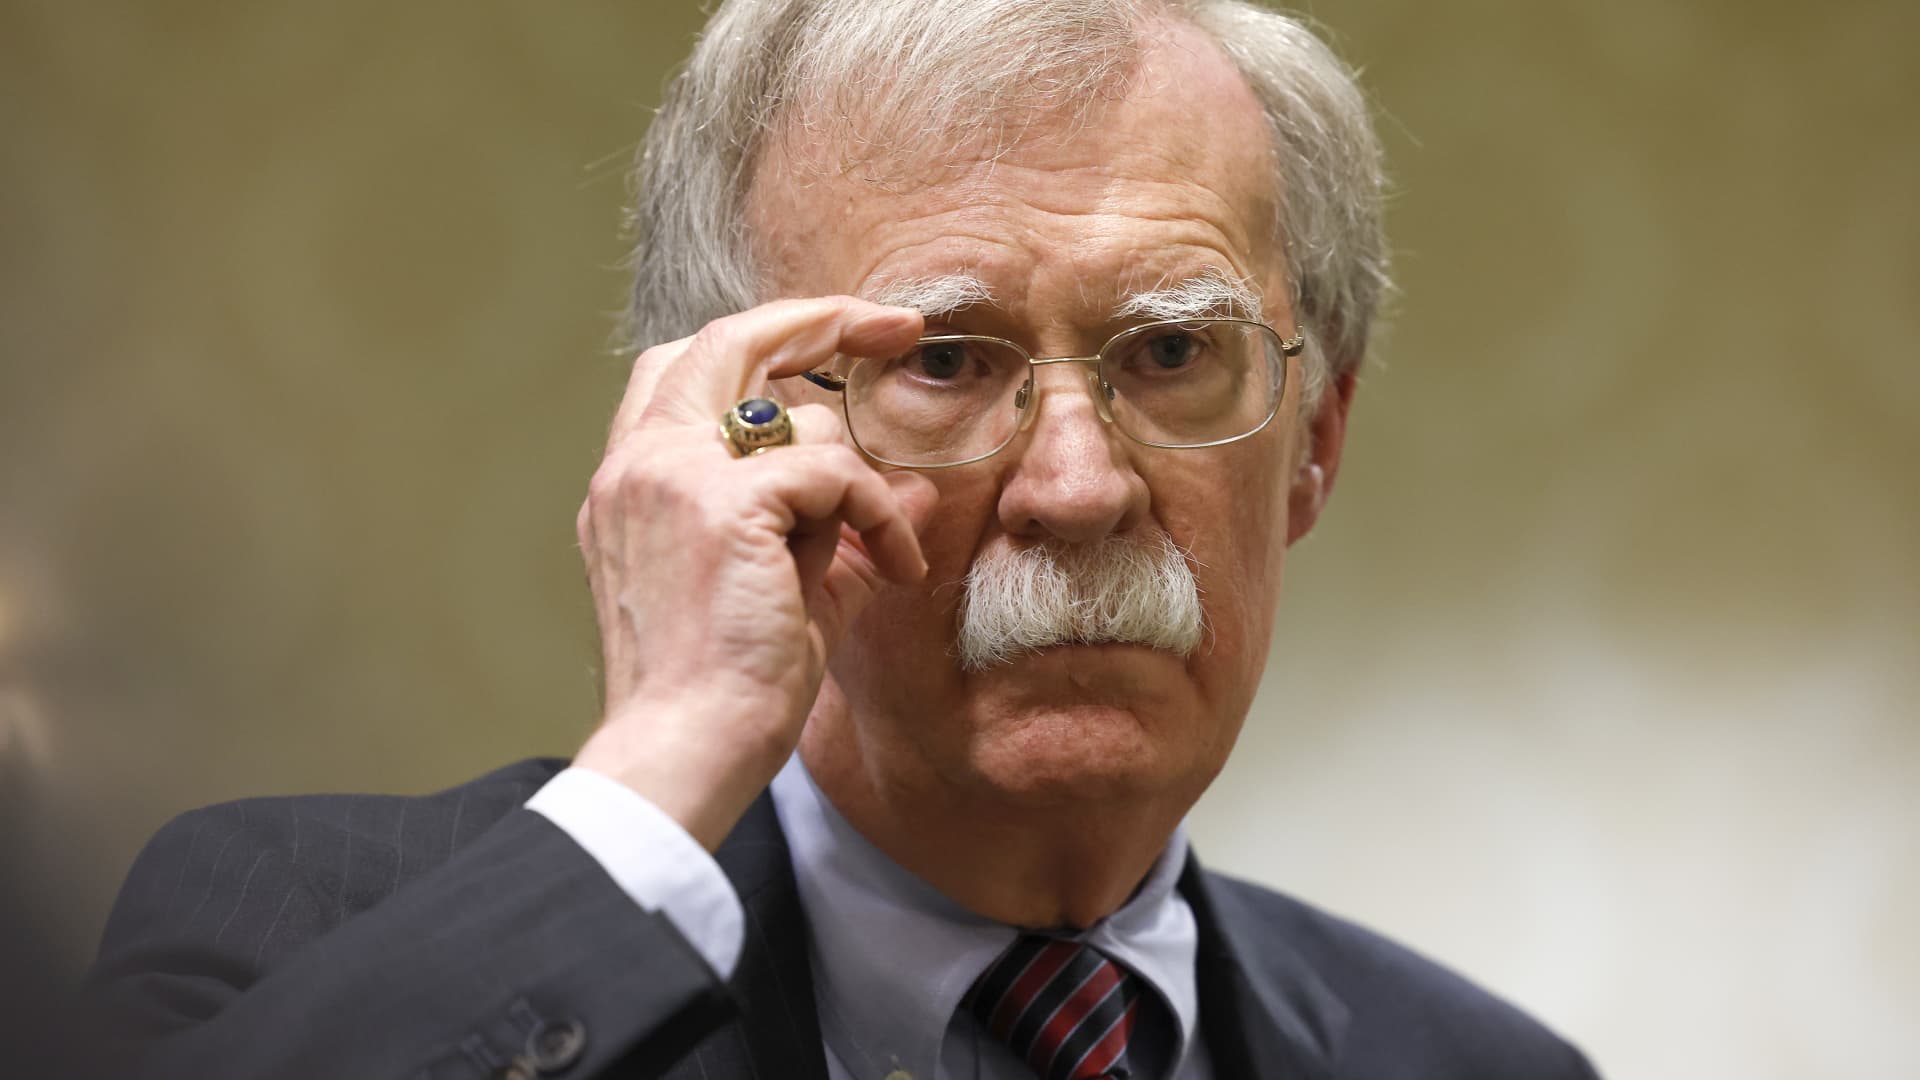 Former Trump national security advisor John Bolton says Gaza war is still 'in the very early stages'